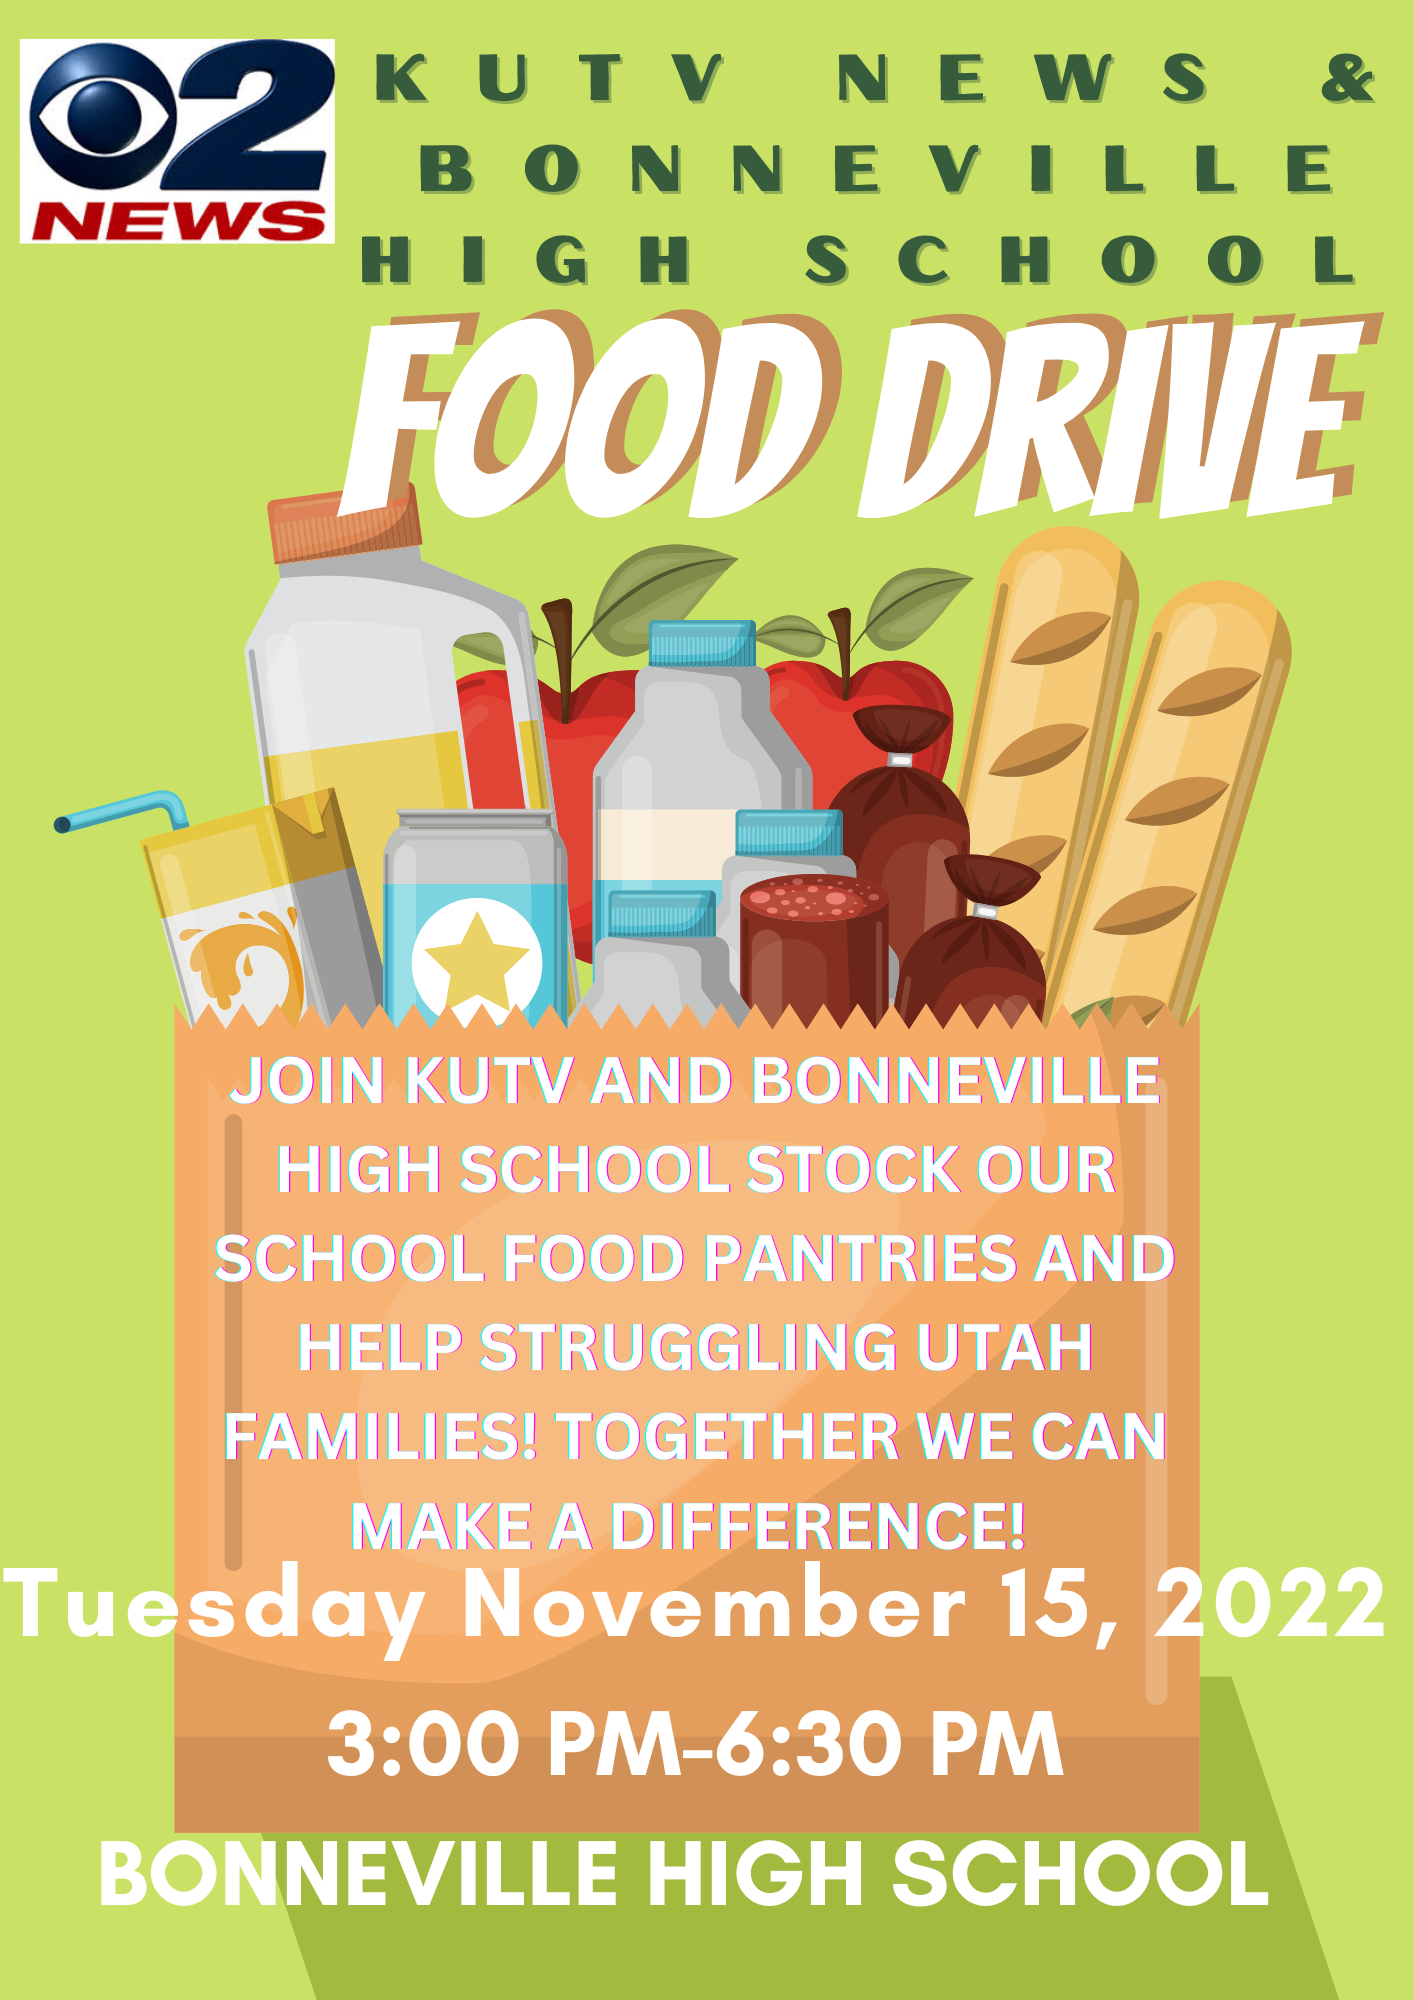 Join KUTV and Bonneville High School stock our school food pantries and help struggling Utah families! Together we can make a difference! Tuesday, November 15th, 2022, 3:00pm-6:30pm, Bonneville High School